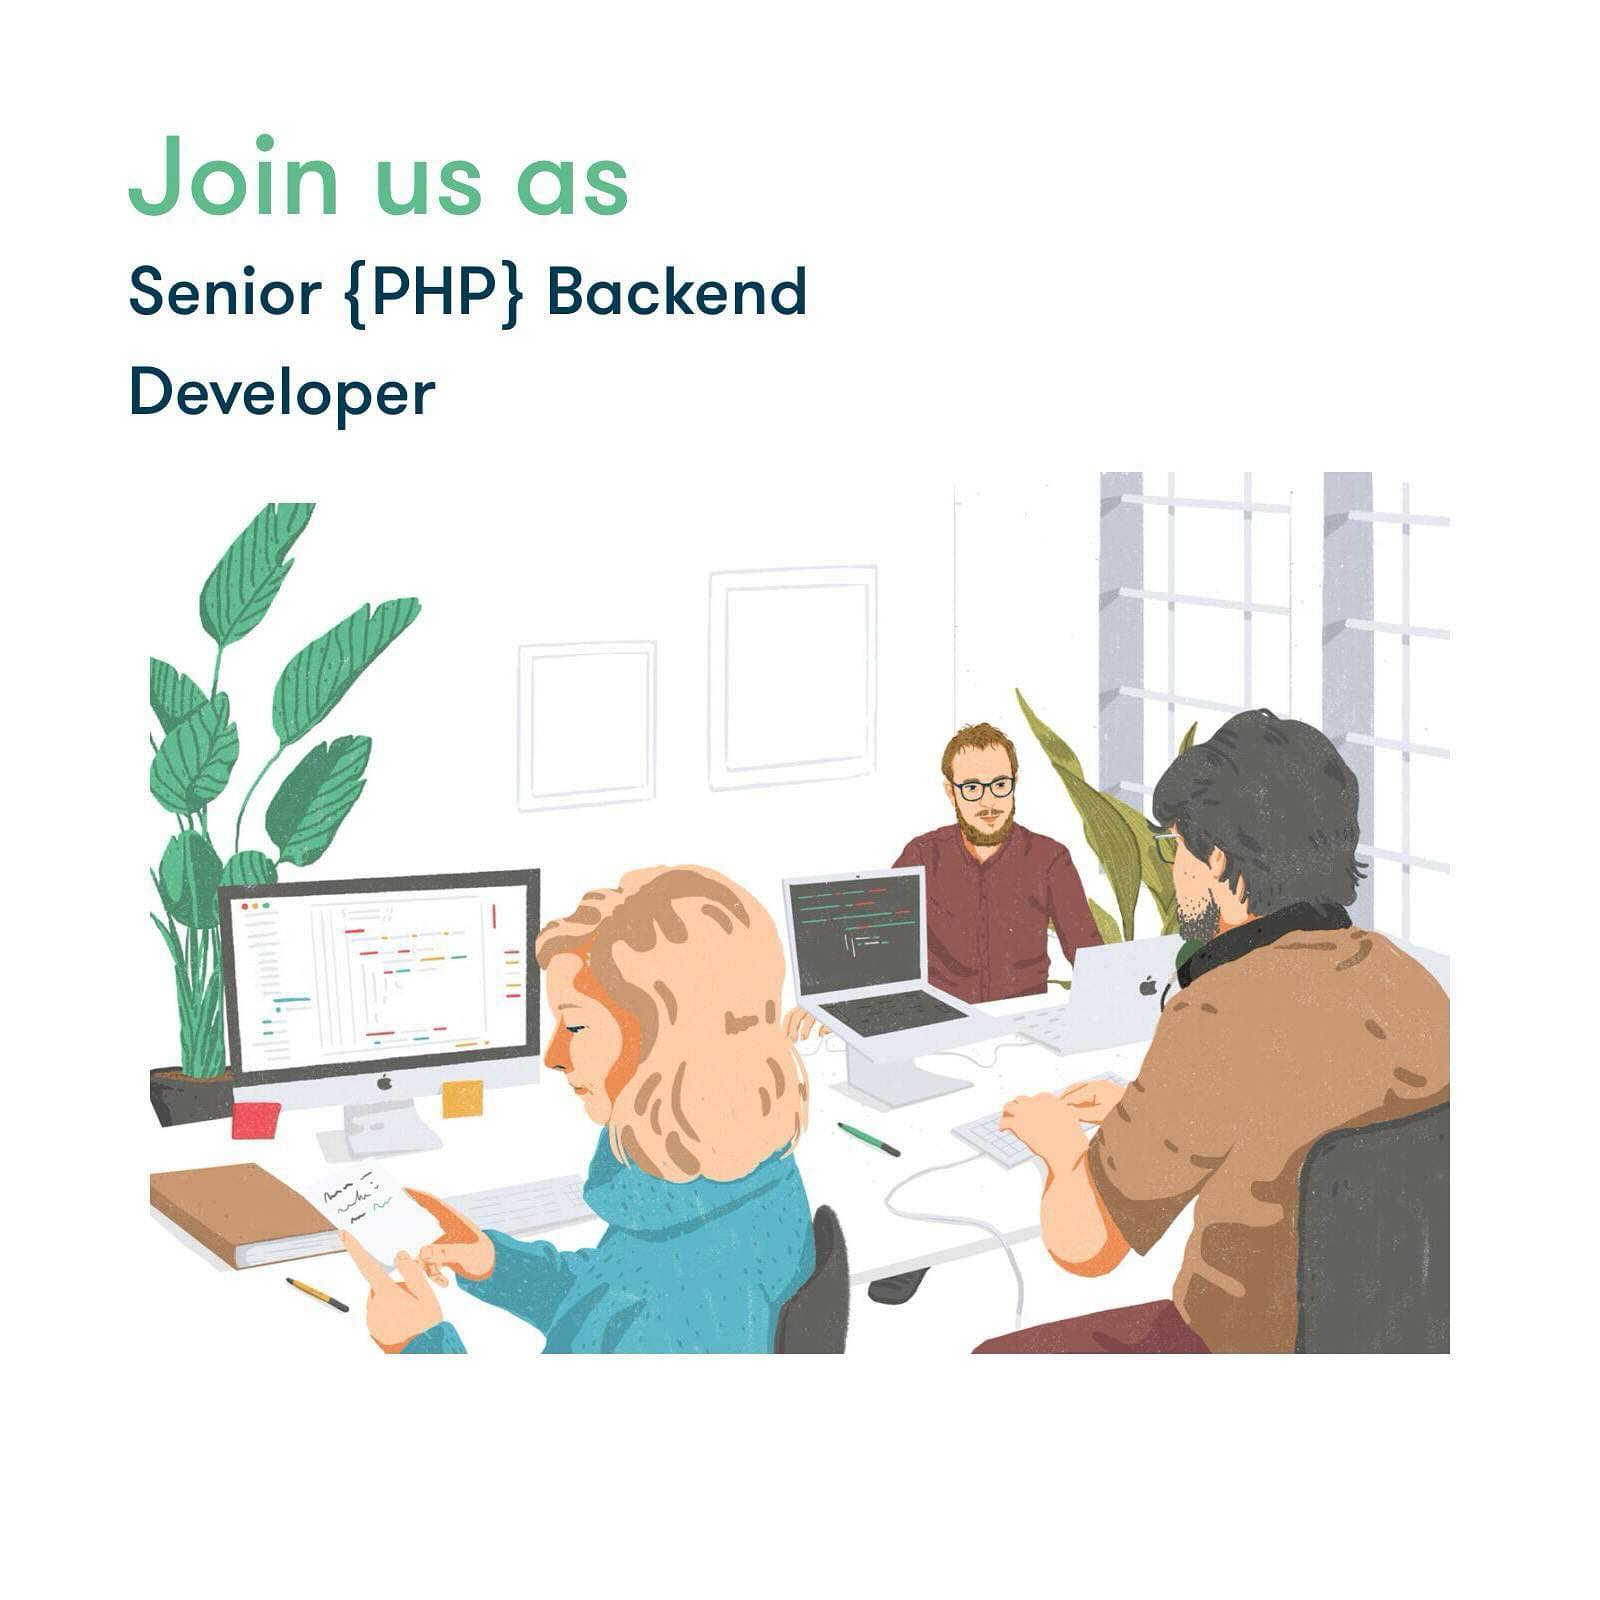 [Recruiting] Senior PHP Backend Developer, Belgium 👀 

We’re seeking experienced, driven professionals who take pride in their results and enjoy working on impactful products. Read the full Job Description &amp; apply on our website (link in bio).